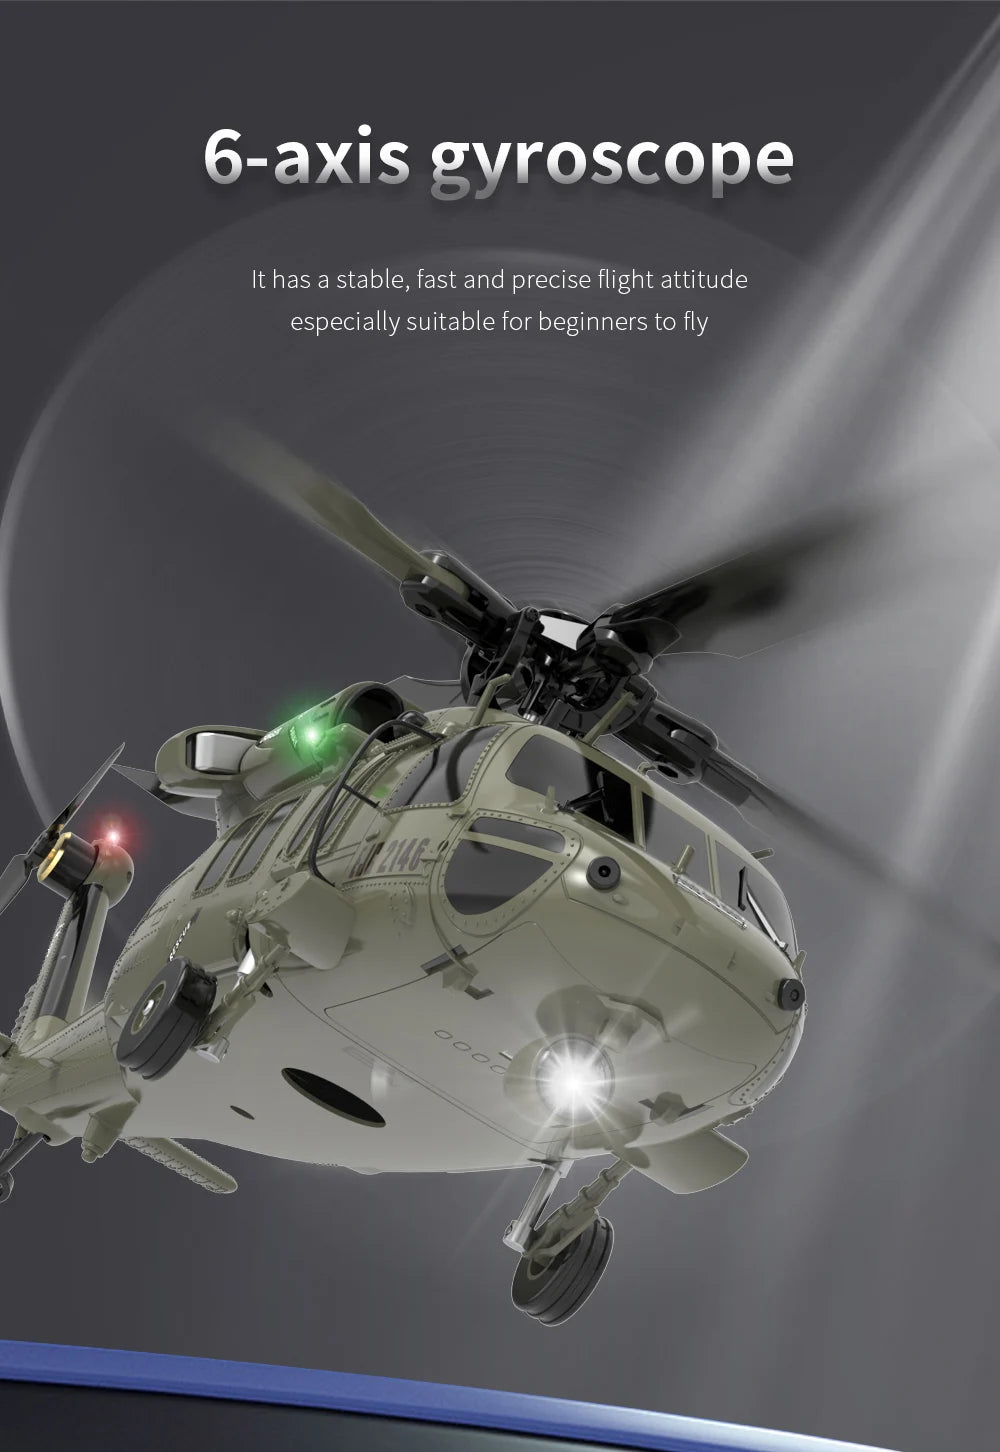 YXZNRC F09 RC Helicopter, 6-axis gyroscope has a stable, fast and precise flight attitude